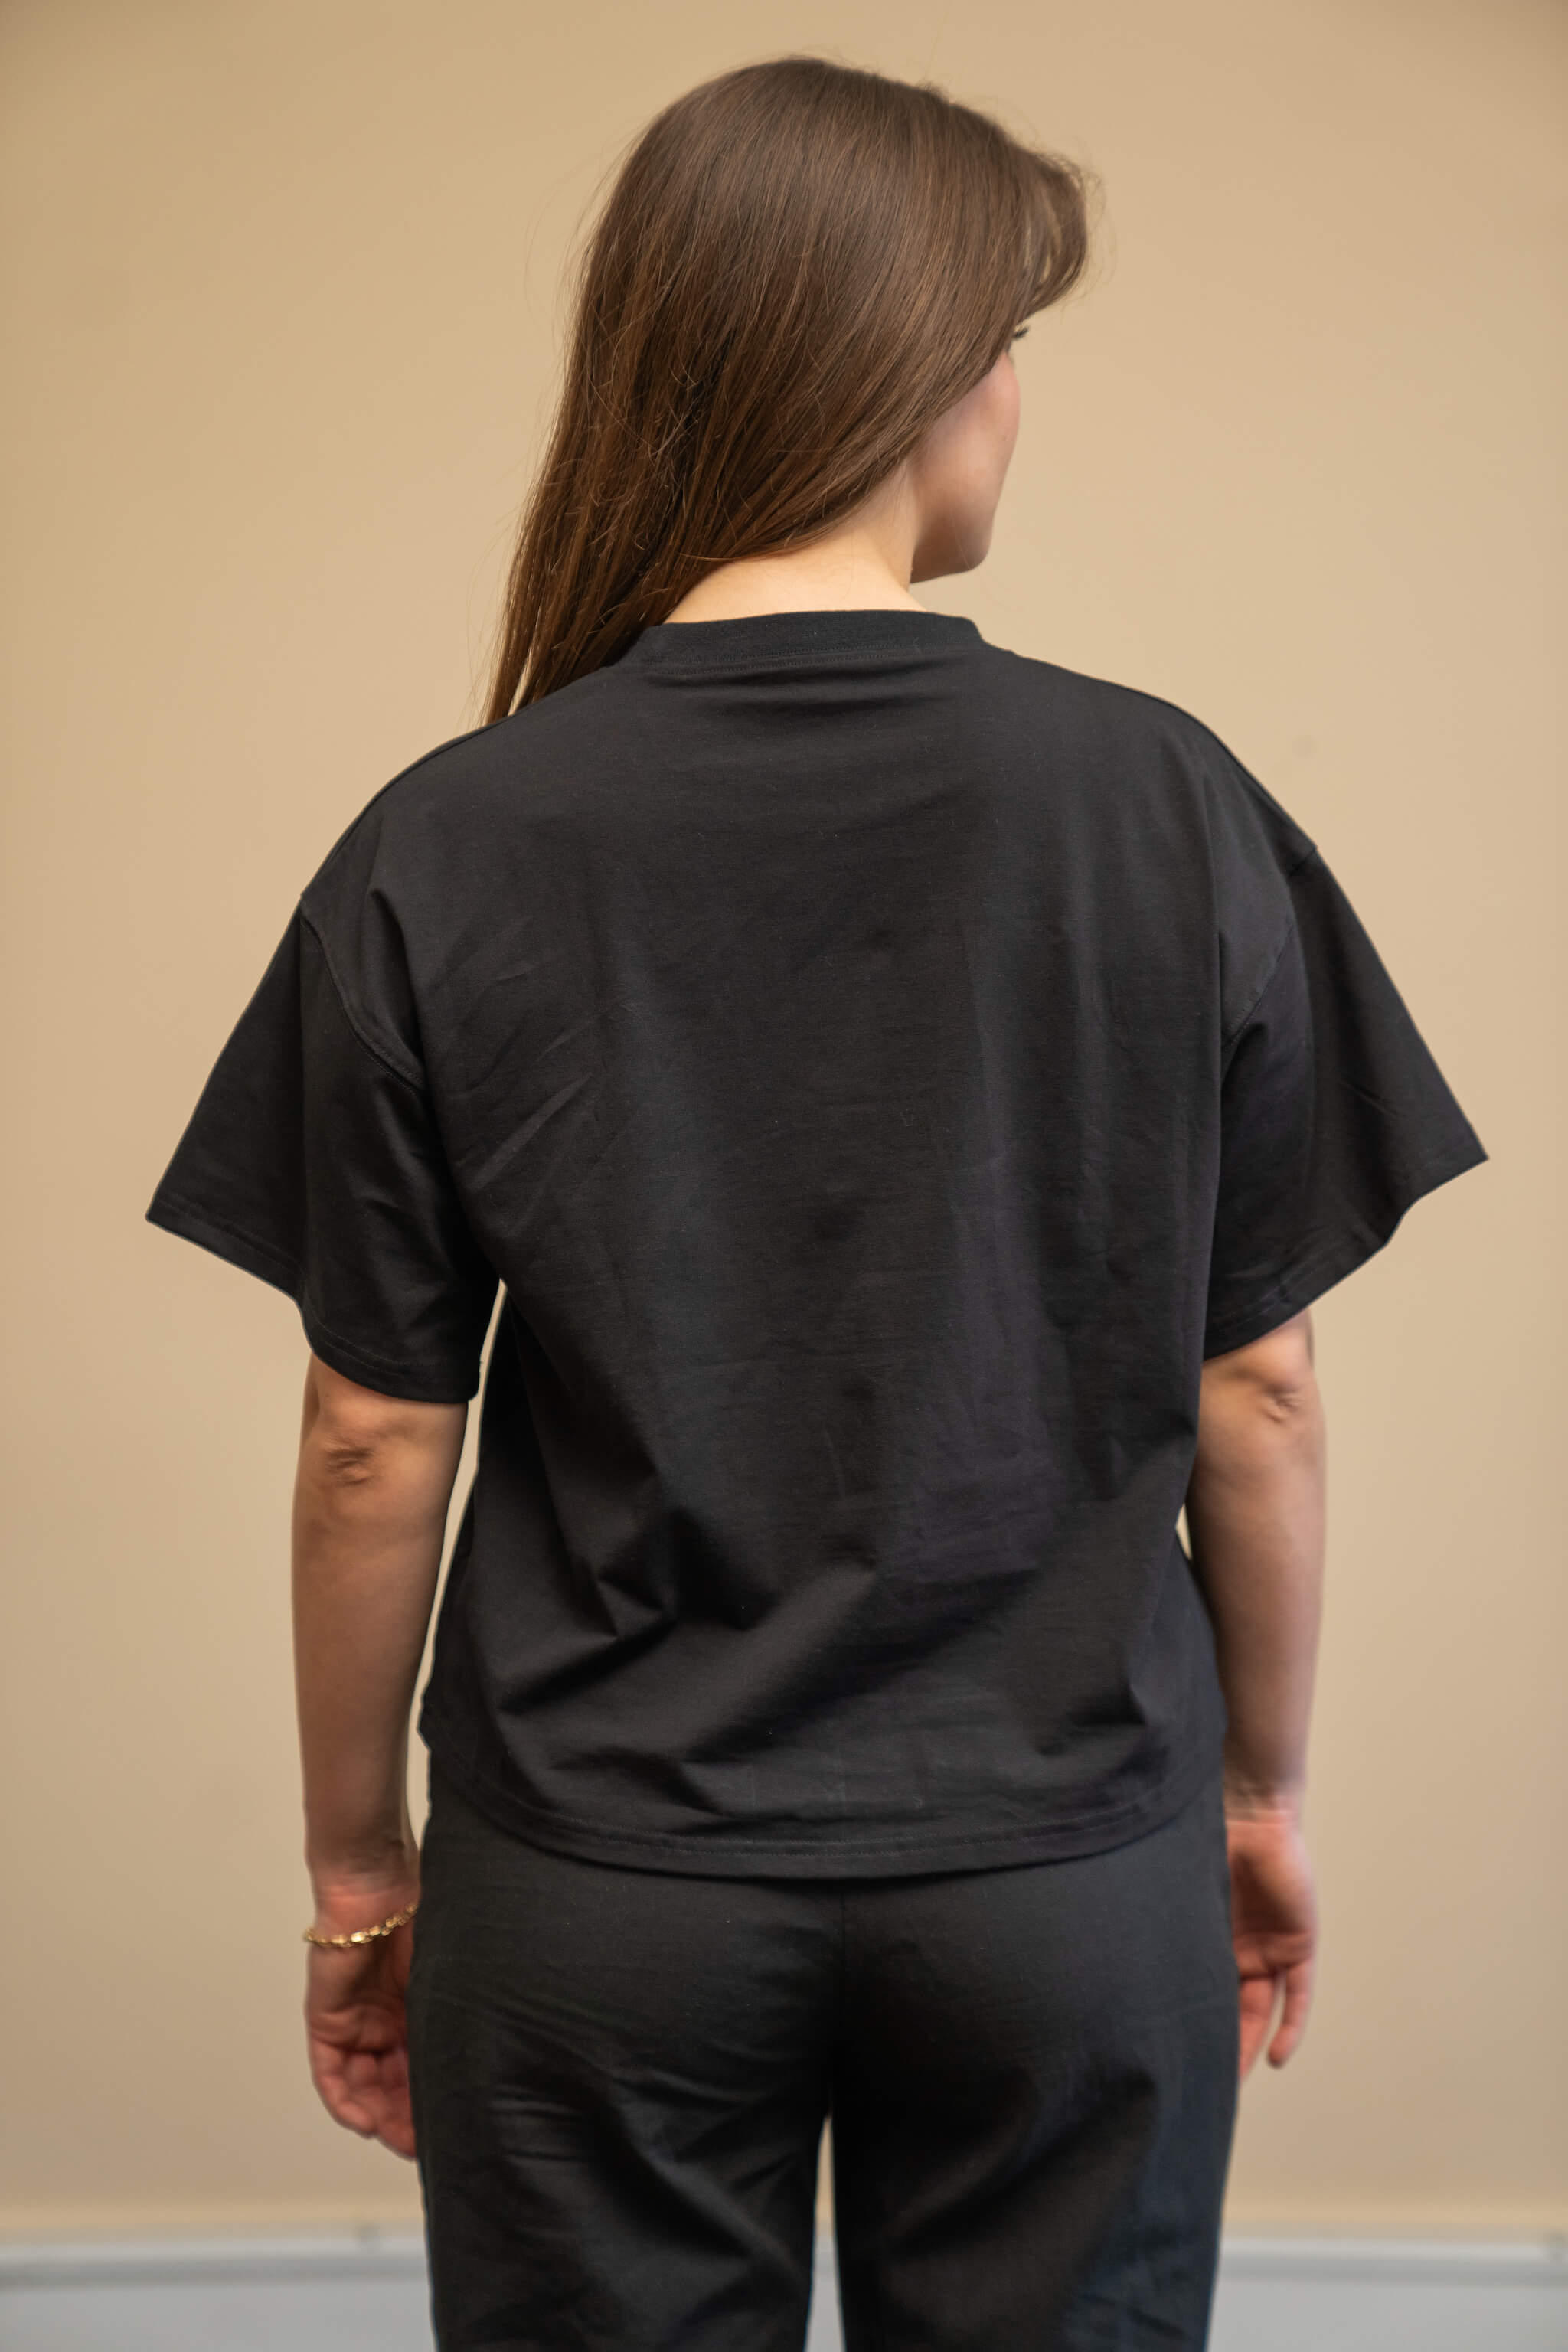 Rear view of a woman wearing a black t-shirt from Cyme Copenhagen's spring/summer collection. The t-shirt has a simple and relaxed fit, showcasing the clean lines and minimalist design. The model stands against a neutral background, highlighting the versatility and casual elegance of the garment.